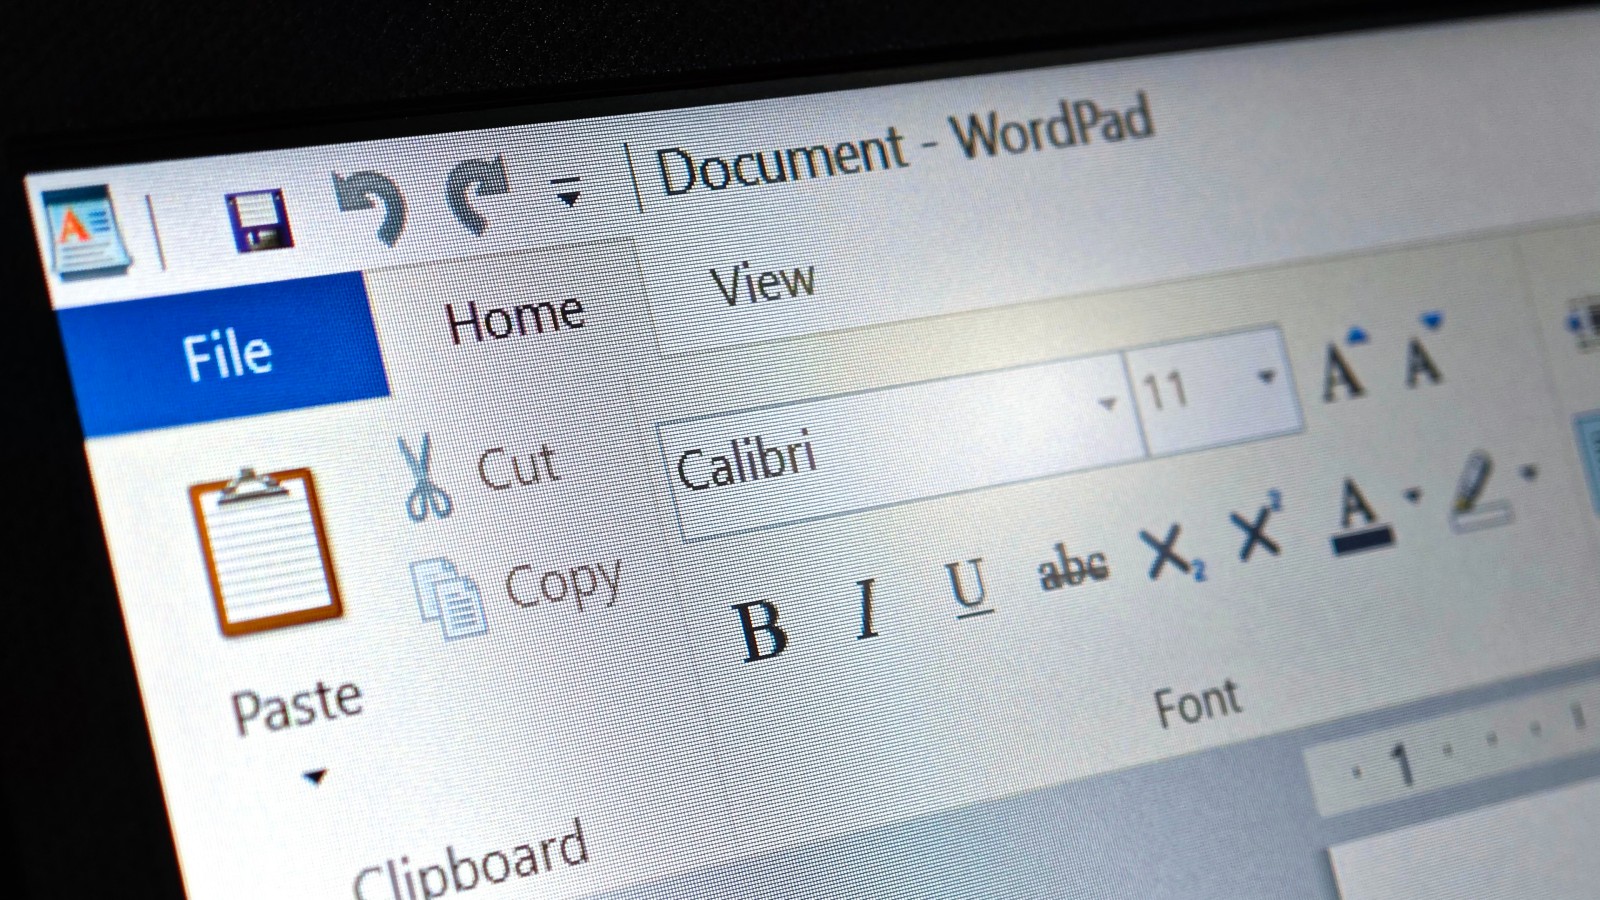 microsoft, android, windows, microsoft, after 30 years, microsoft is finally removing wordpad from windows